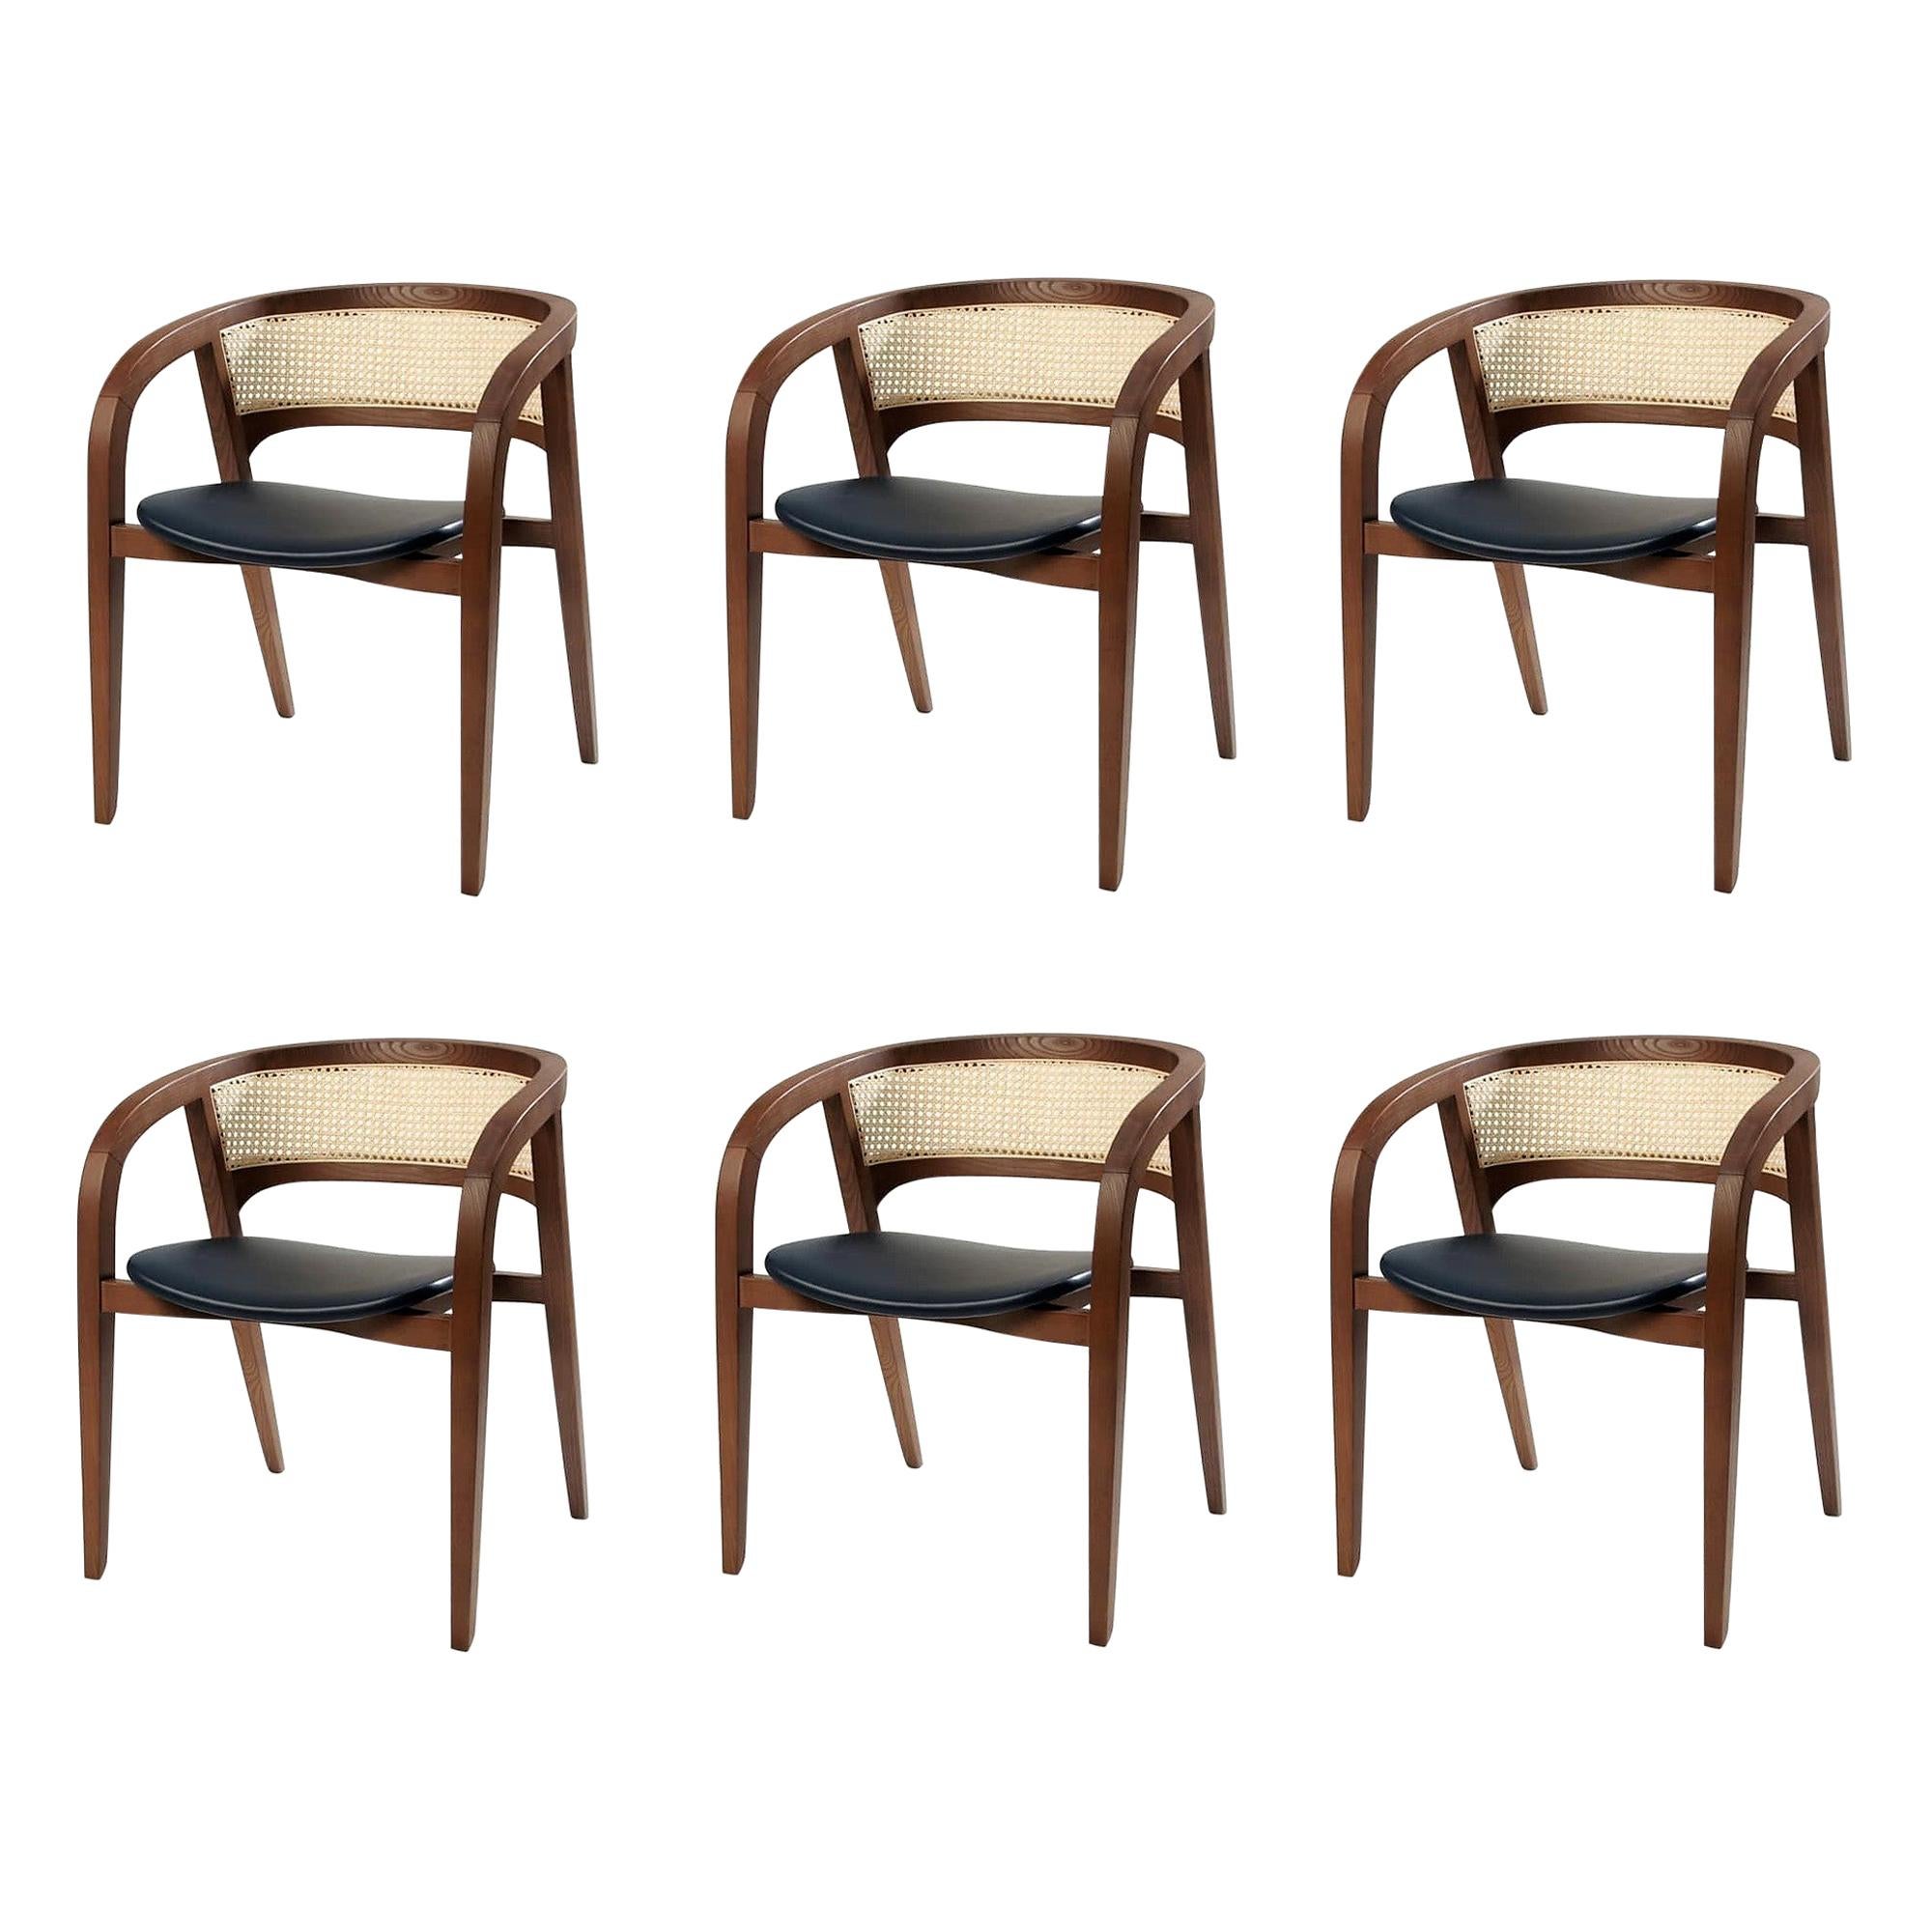 Contemporary Rattan/Cane Dining Chair Set of 6